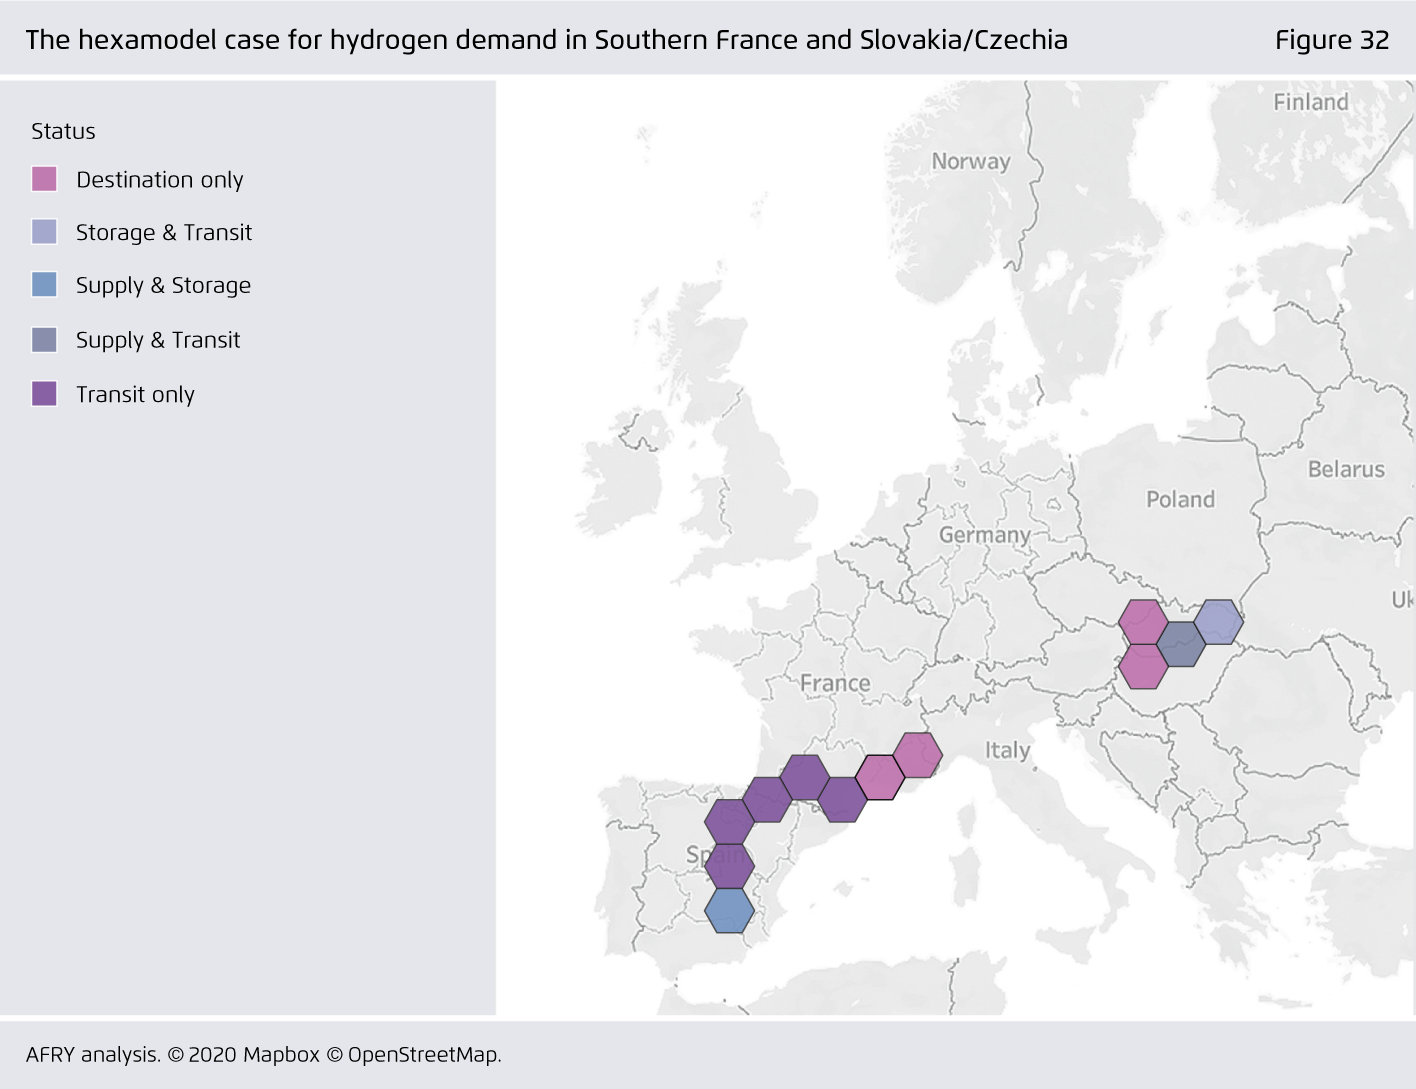 Preview for The hexamodel case for hydrogen demand in Southern France and Slovakia/Czechia